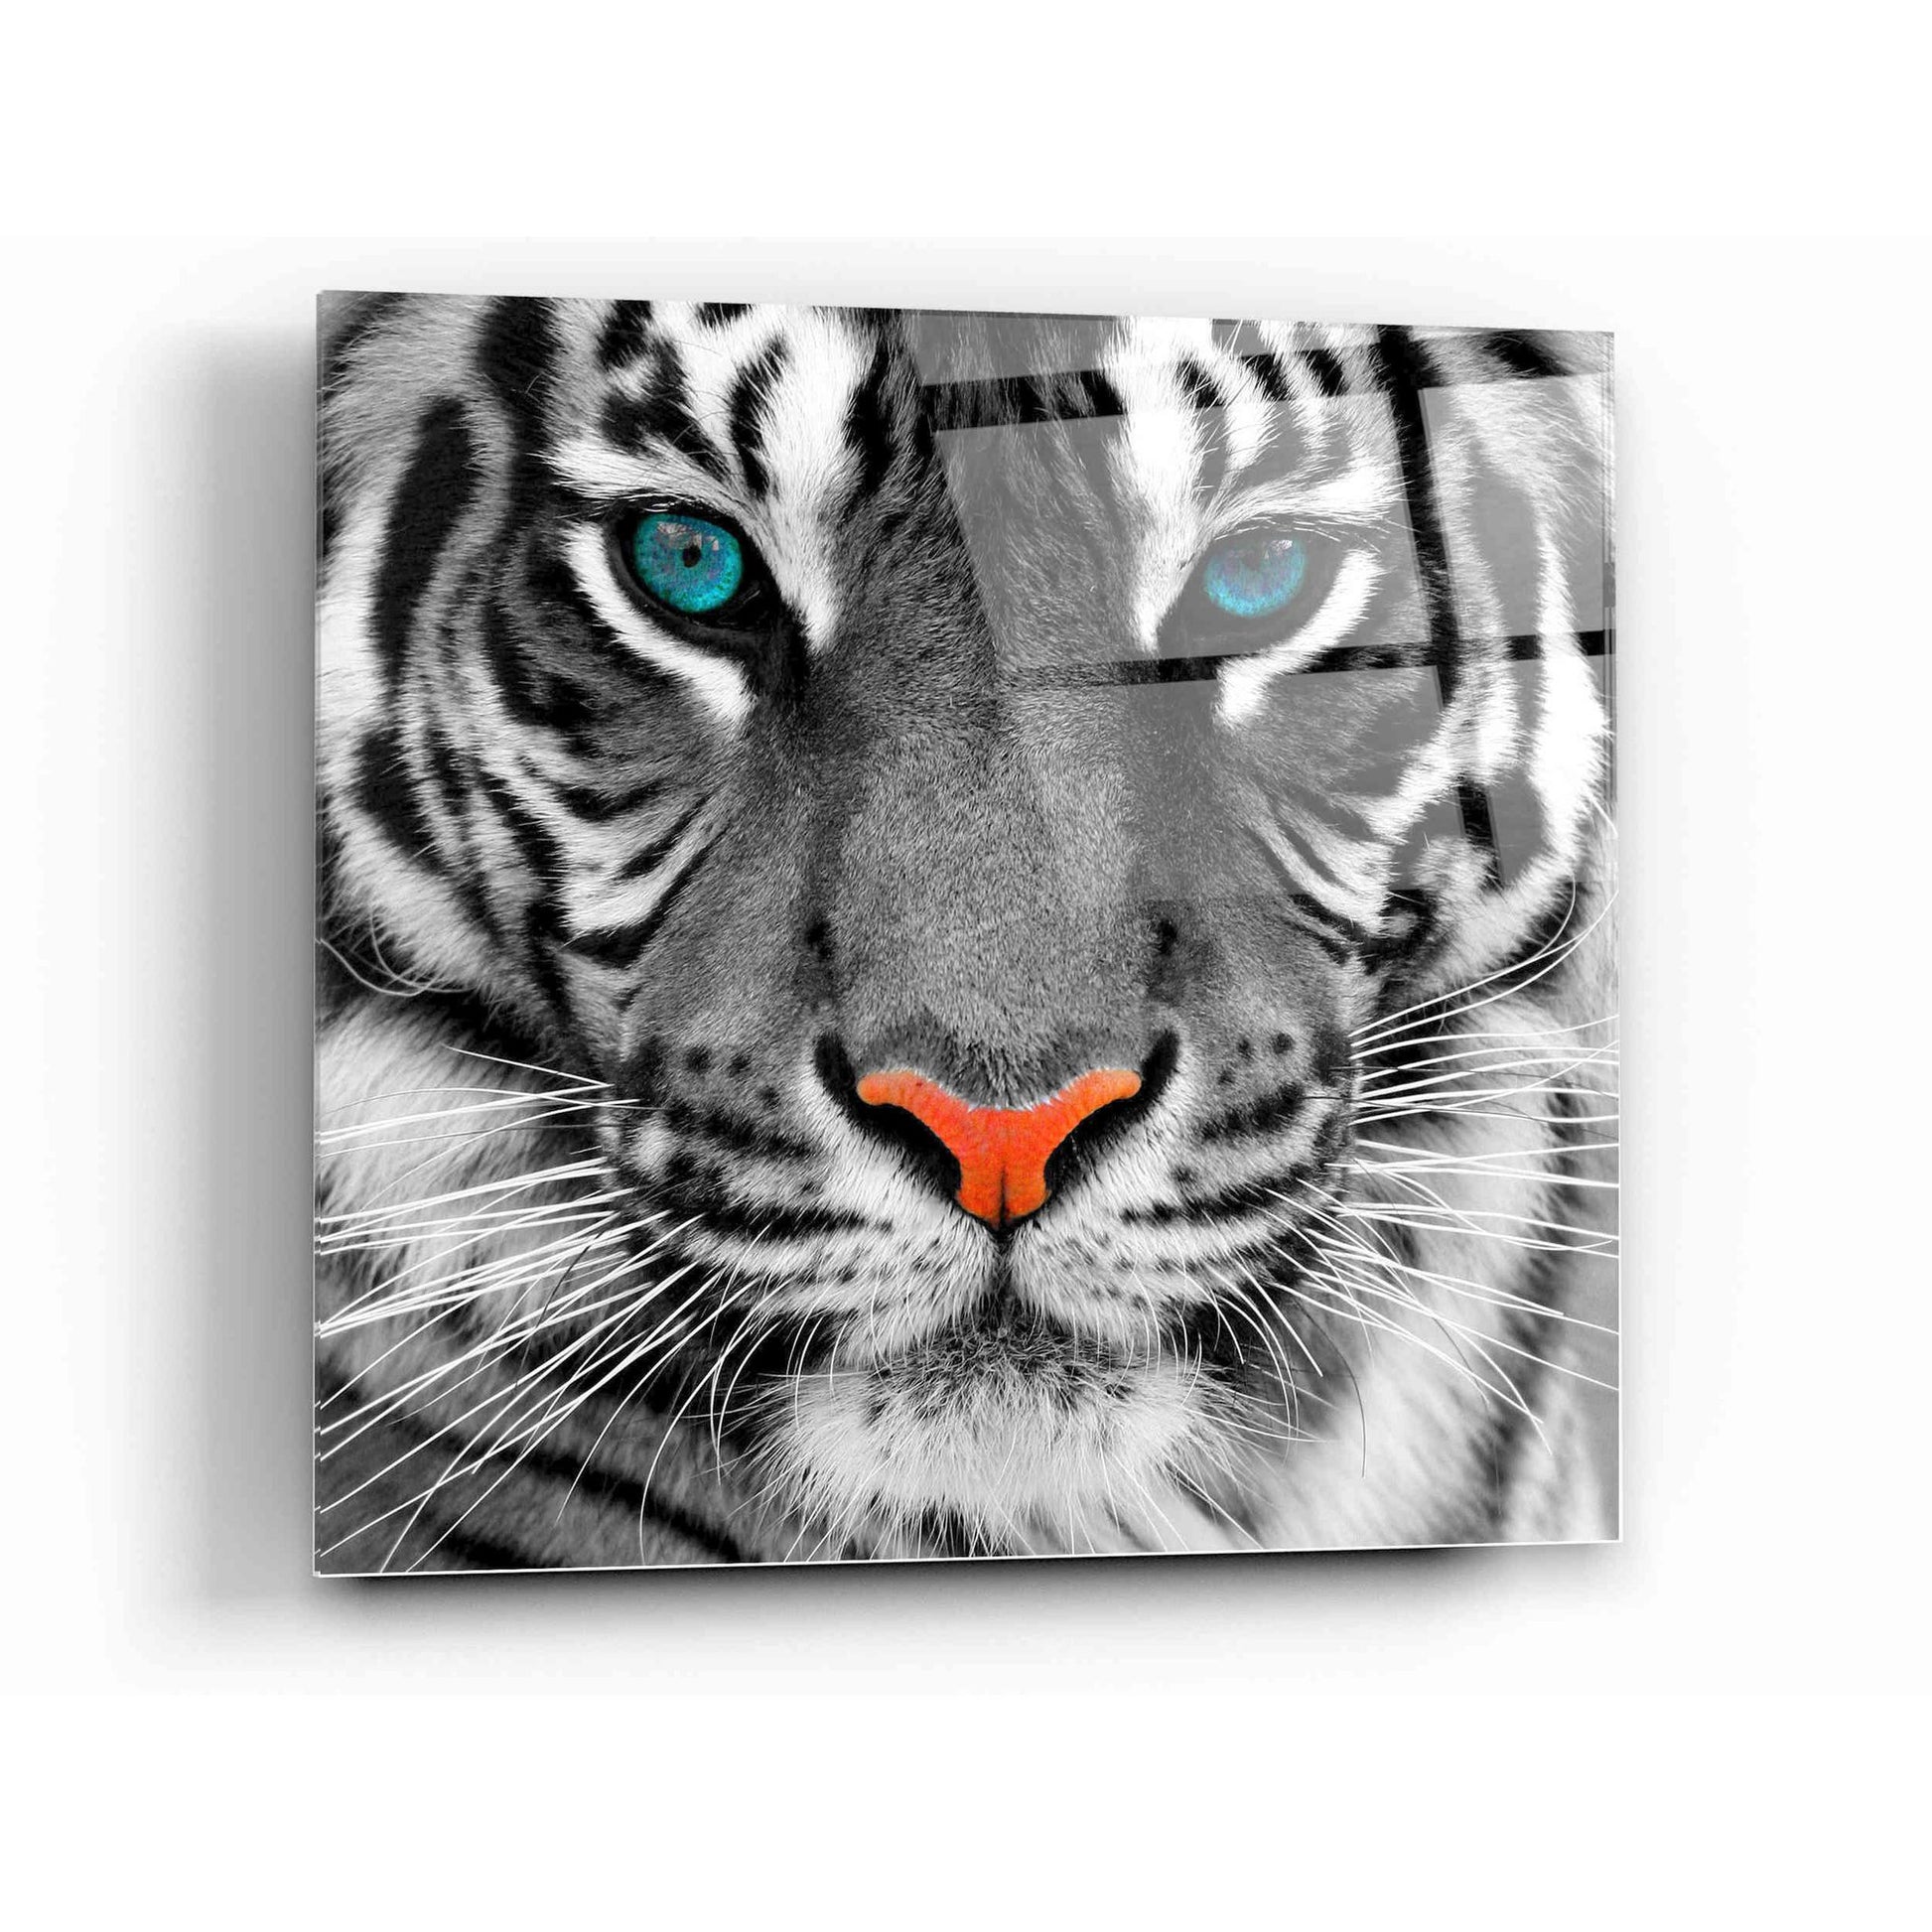 Epic Art 'Thrill of the Tiger' Acrylic Glass Wall Art,12x12